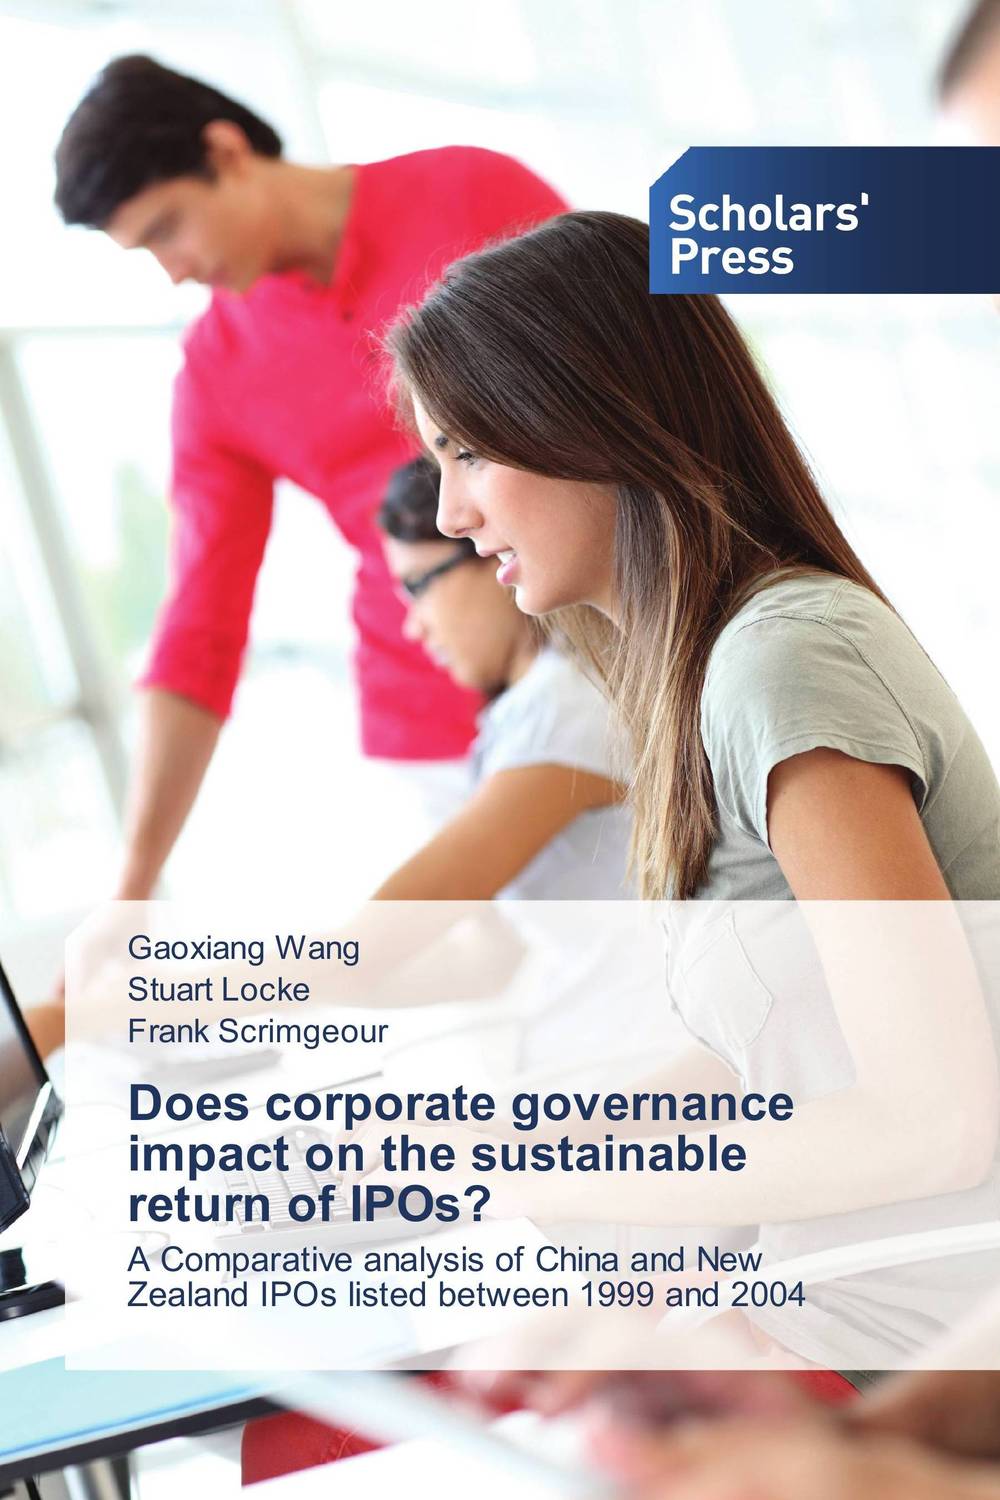 Does corporate governance impact on the sustainable return of IPOs?